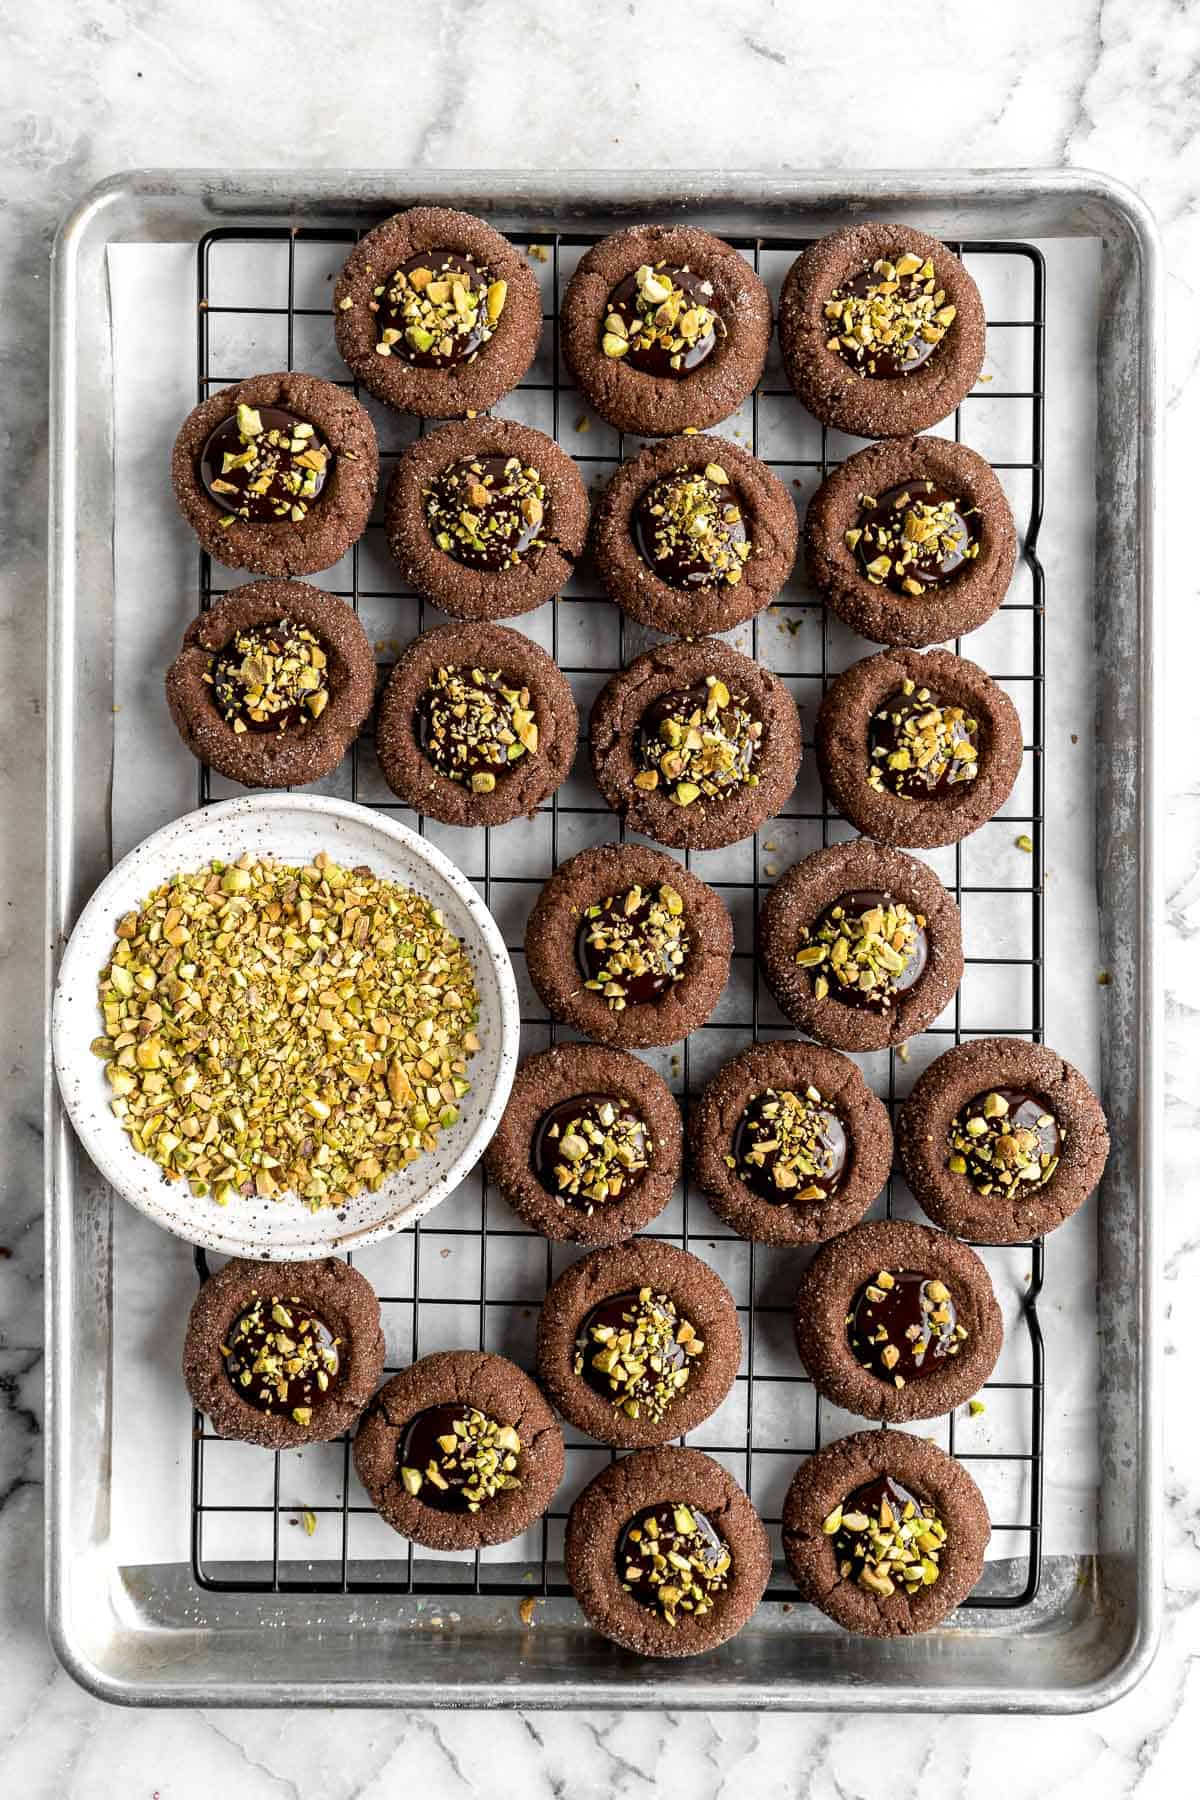 Chocolate Thumbprint Cookies are rich and chewy chocolate cookies with a smooth and velvety chocolate ganache filling topped with crunchy pistachios. | aheadofthyme.com